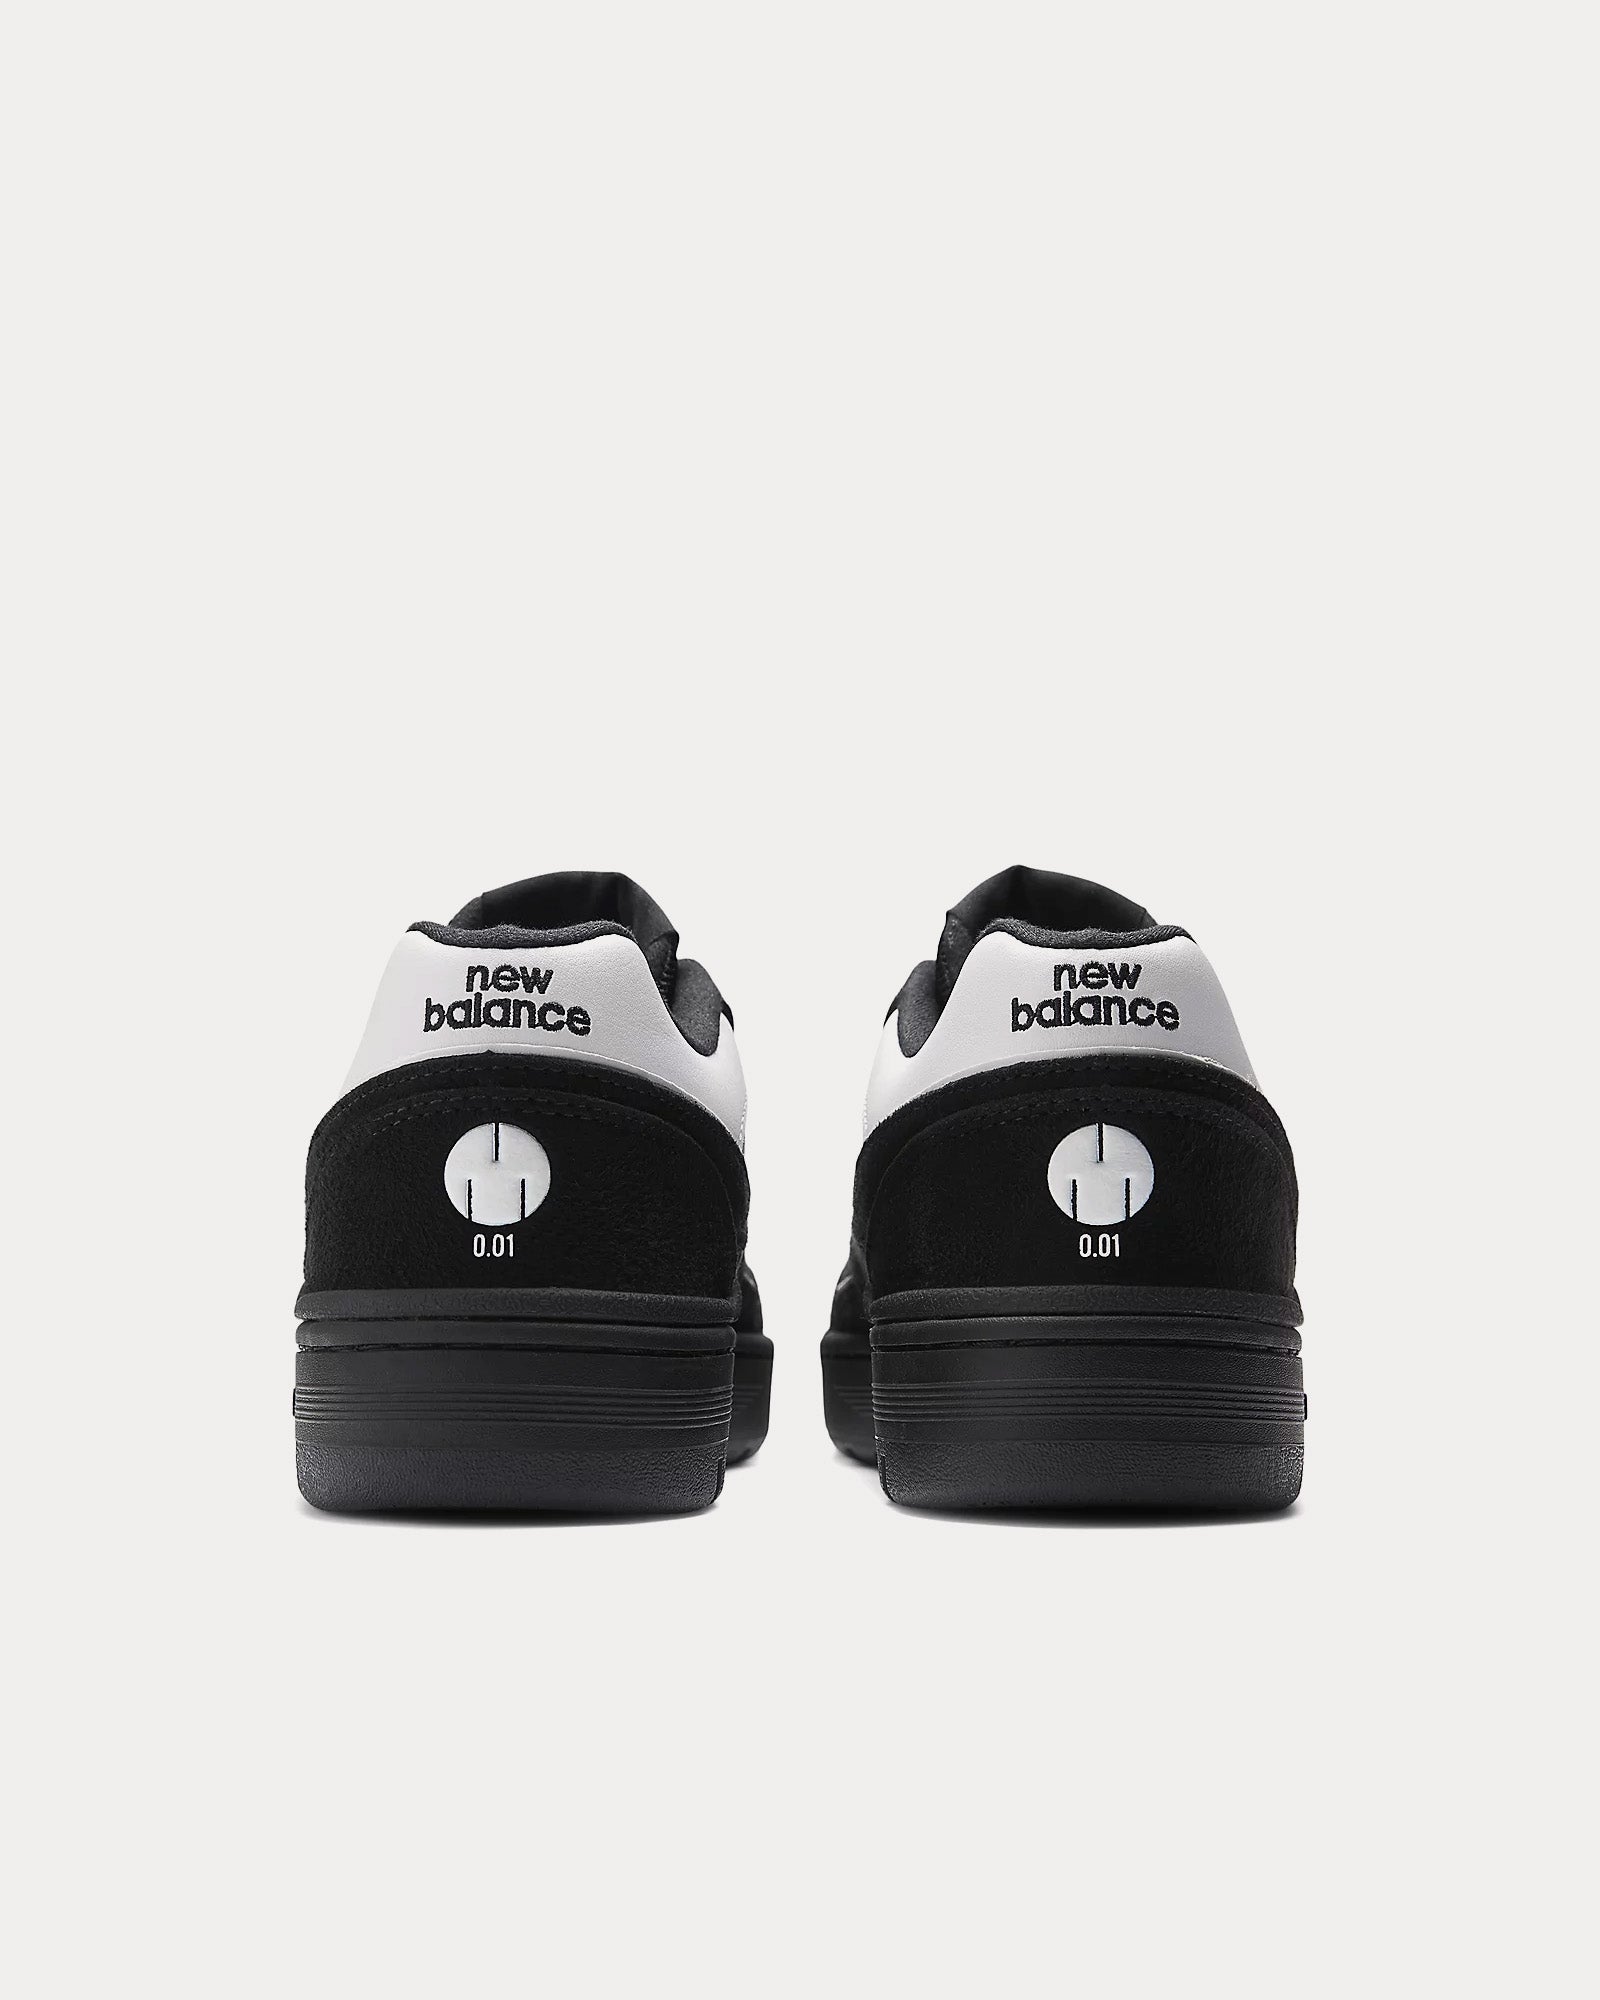 New Balance x MSFTrep - 0.01 Black / White Low Top Sneakers